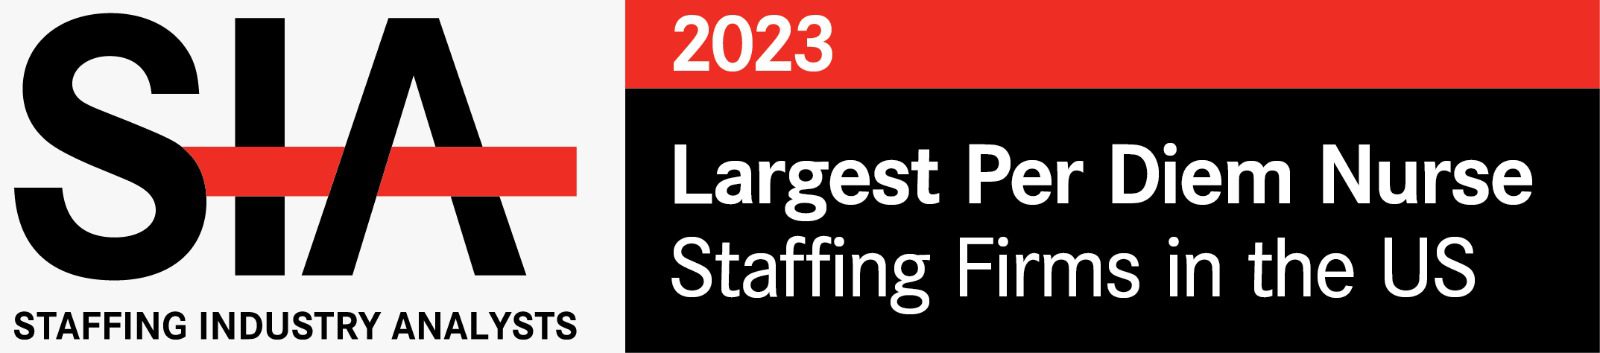 SIA’s Largest Per Diem Nurse Staffing Firms in the US 2023